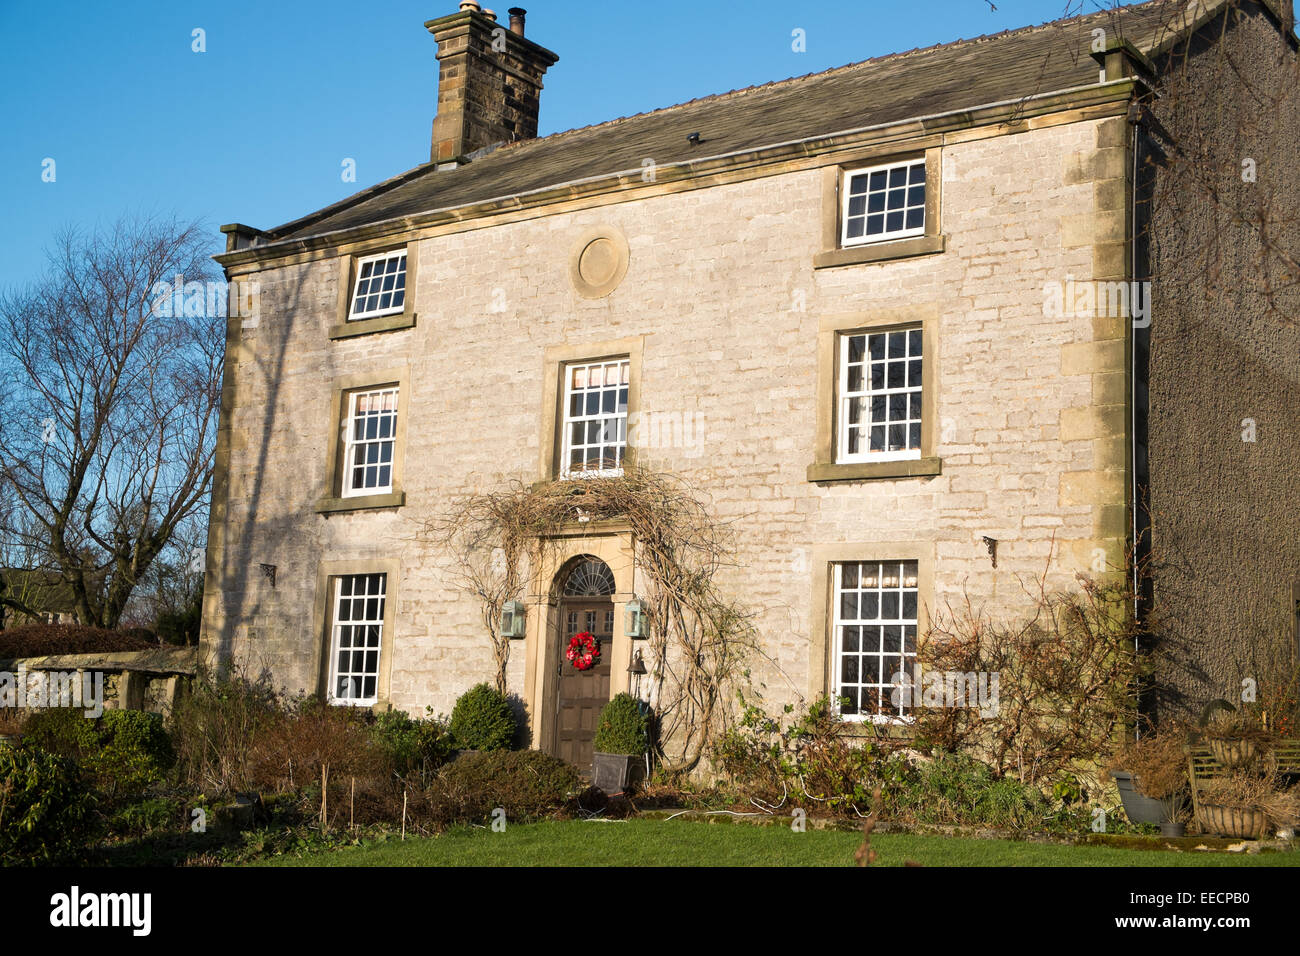 Detached English country home in the village of Hartington in Derbyshire Dales,England Stock Photo